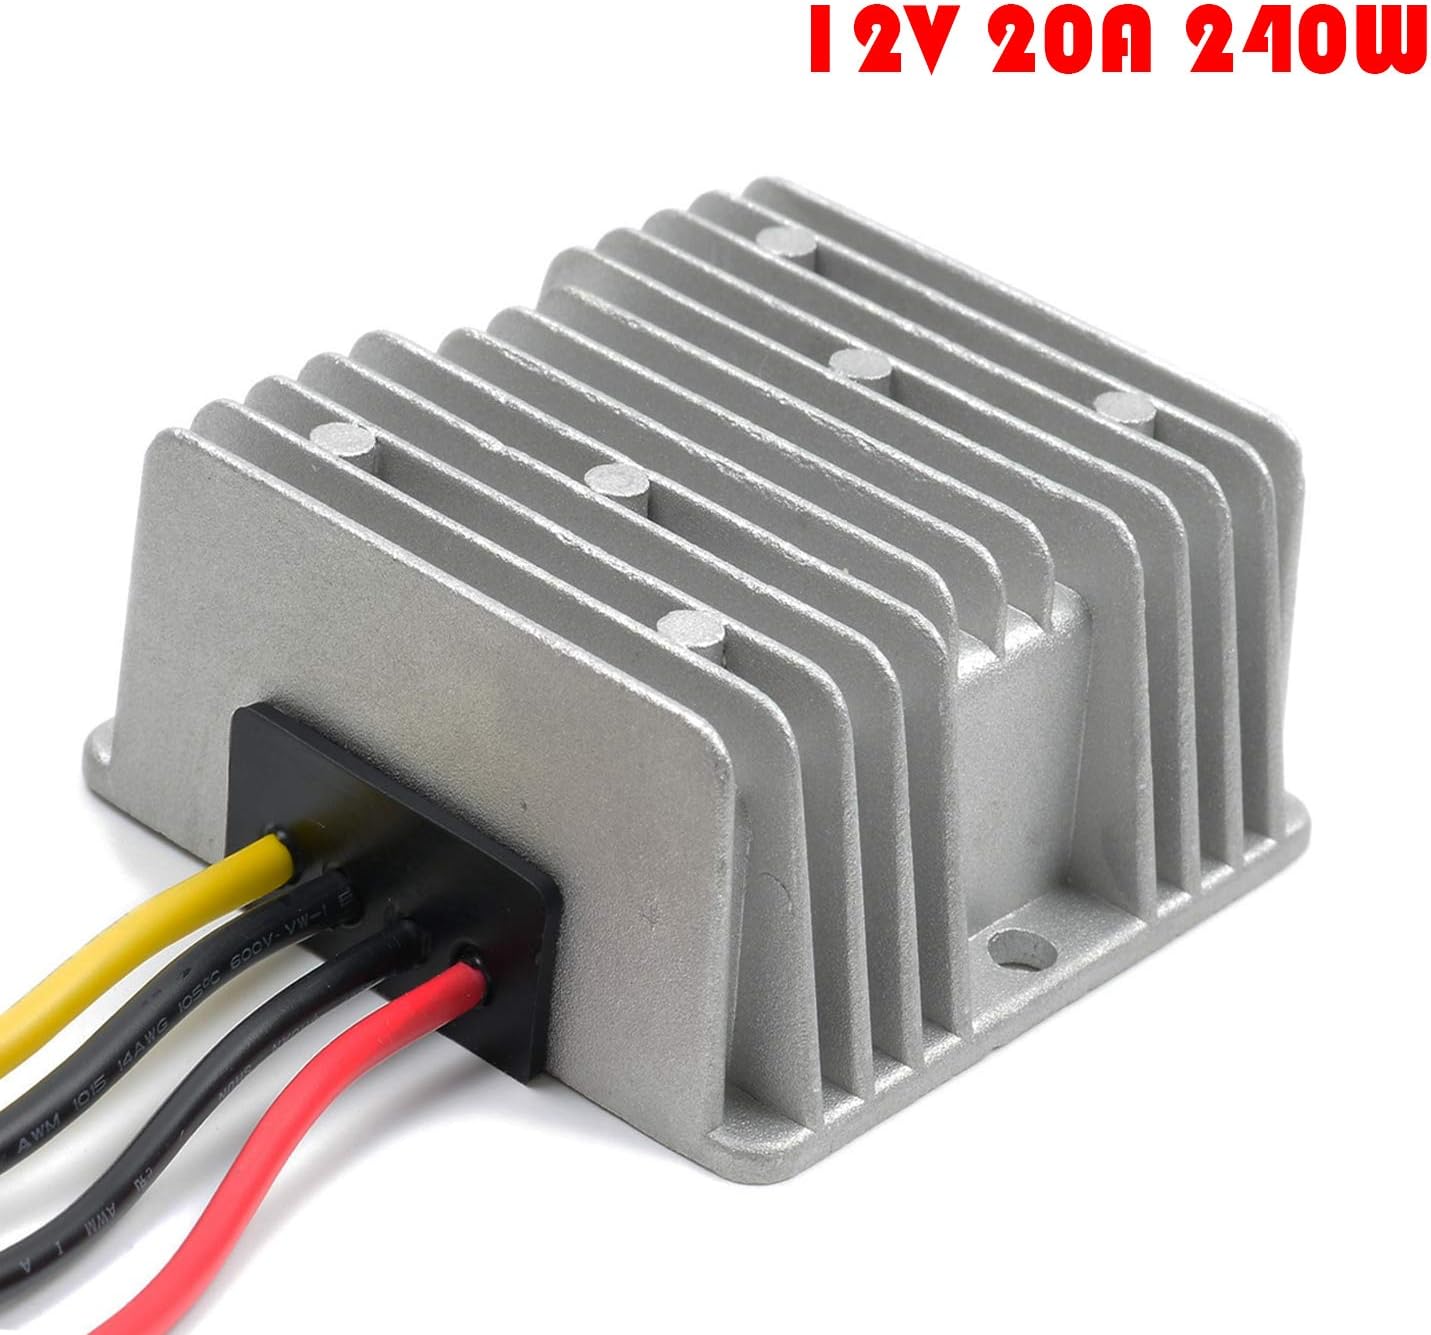 New DC 48 V to 12 V 20 A 240 W Step-Down Buck Converter Power Supply for car 